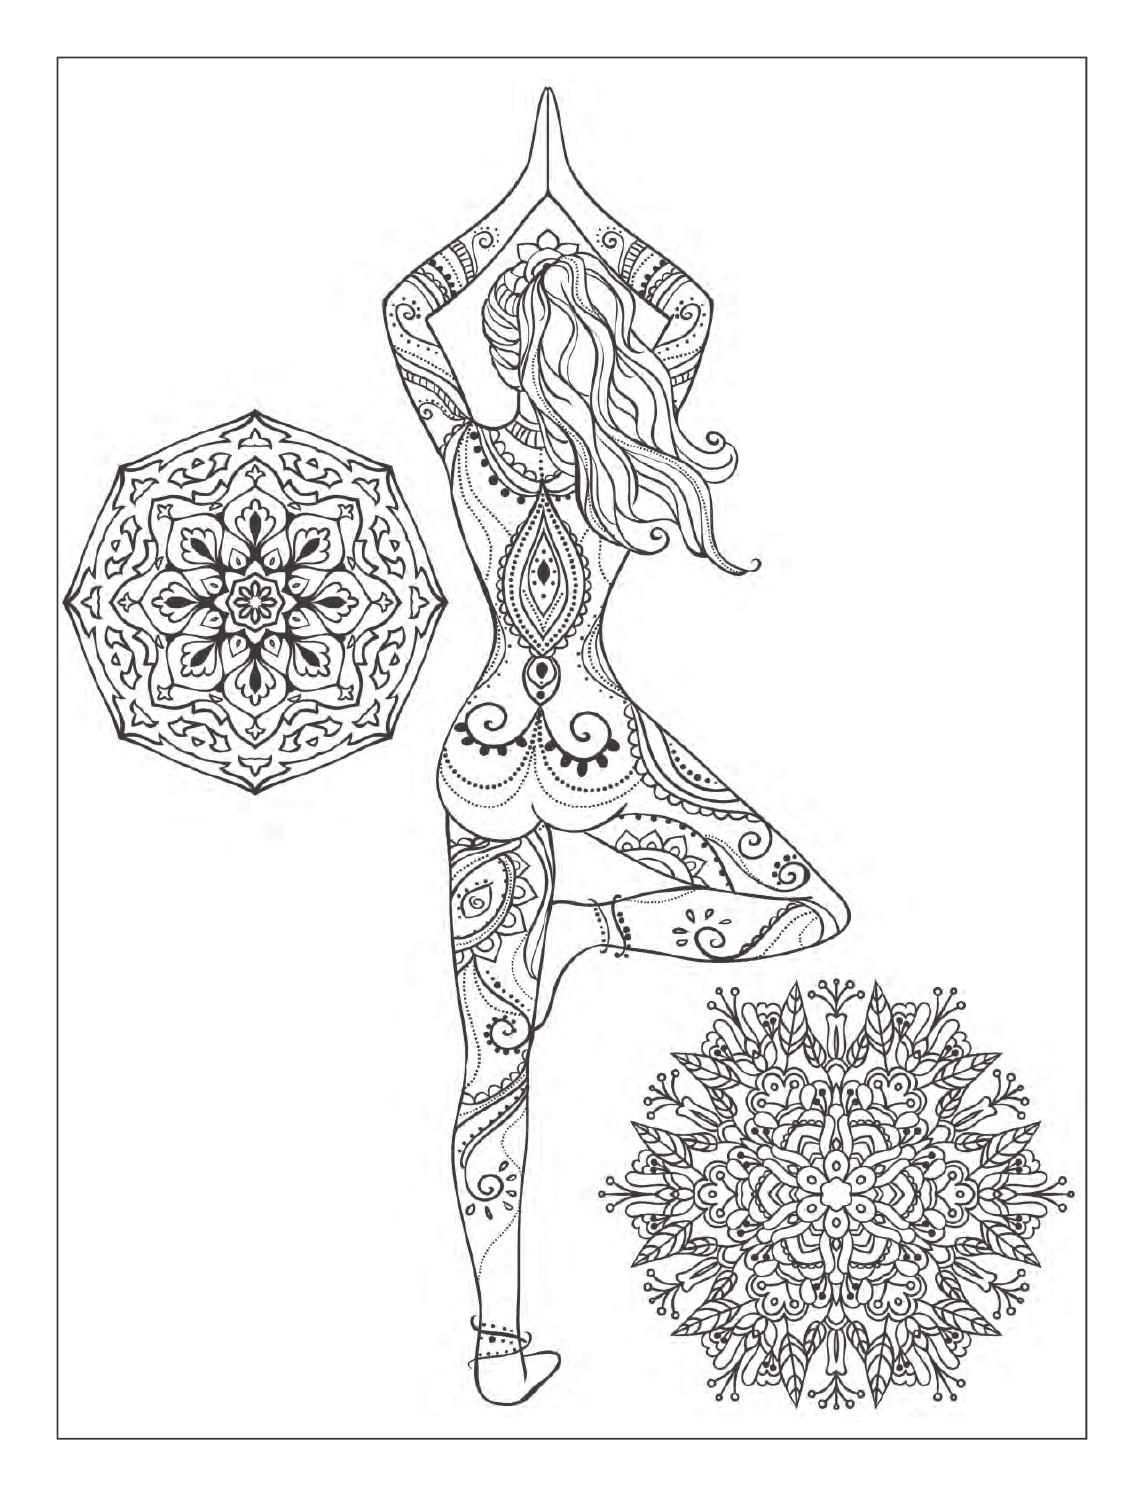 Yoga And Meditation Coloring Book For Adults With Yoga Poses And Mandalas Designs Col